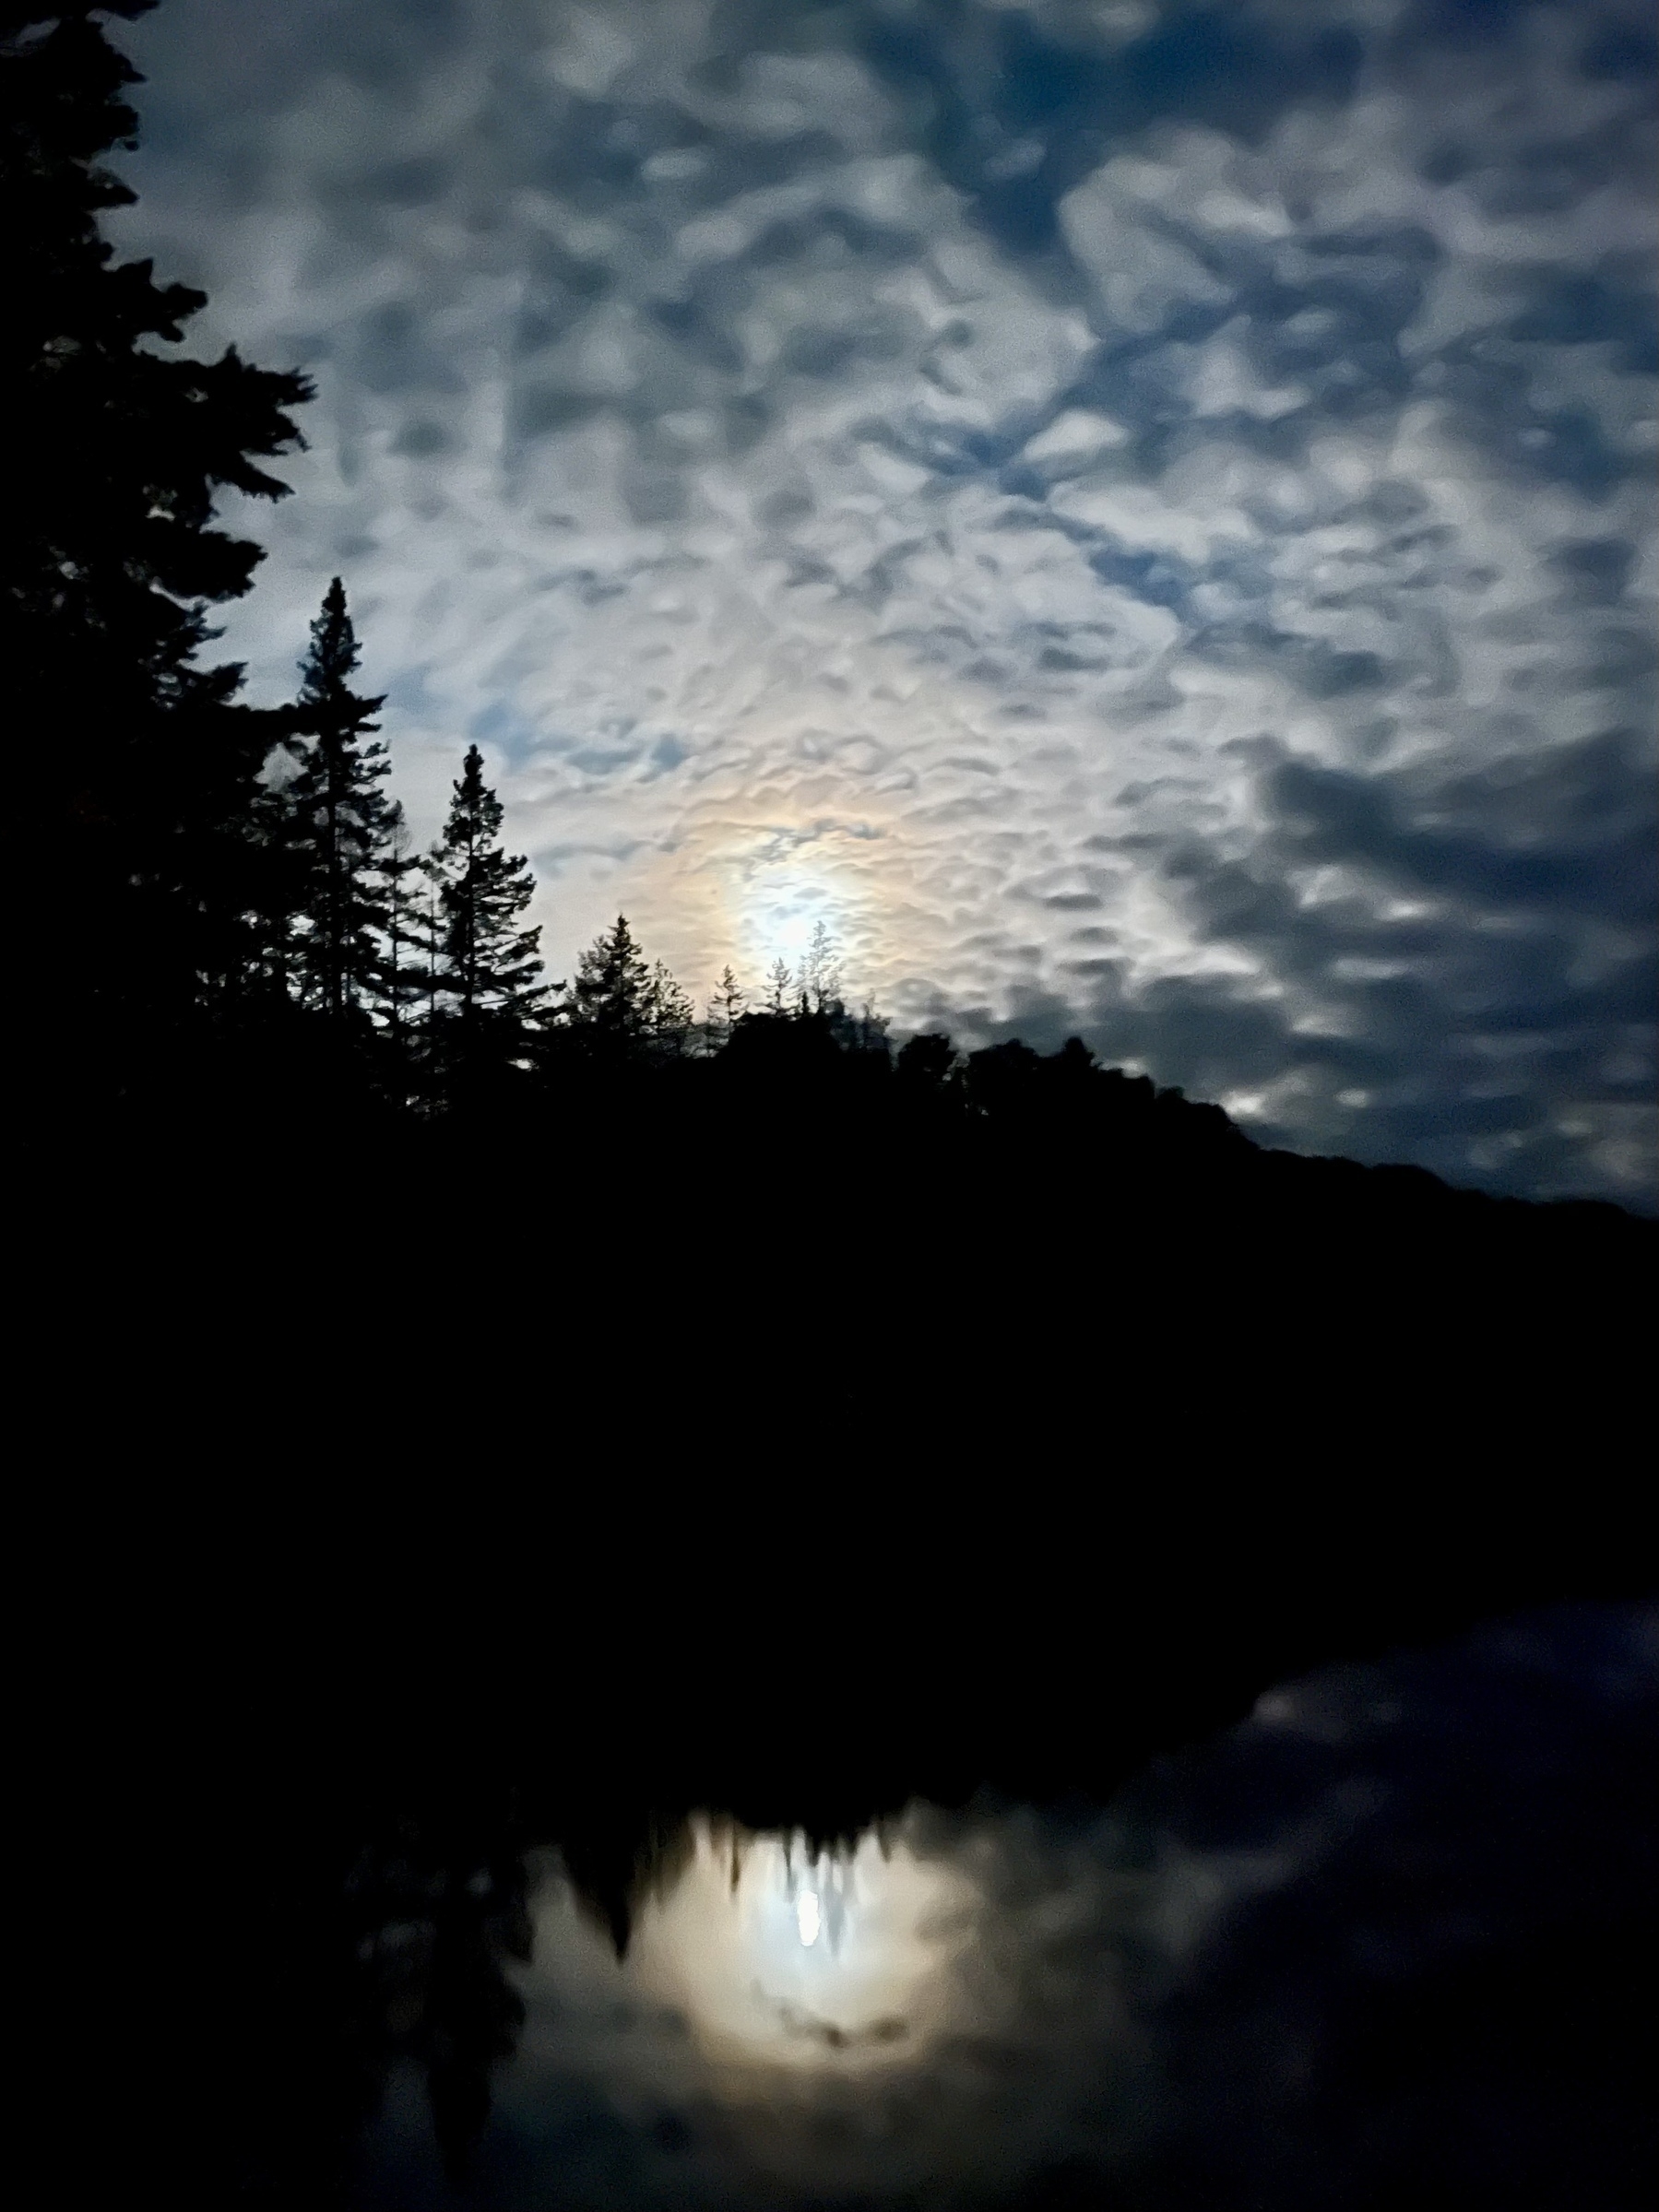 Moon in clouds shining over a lake